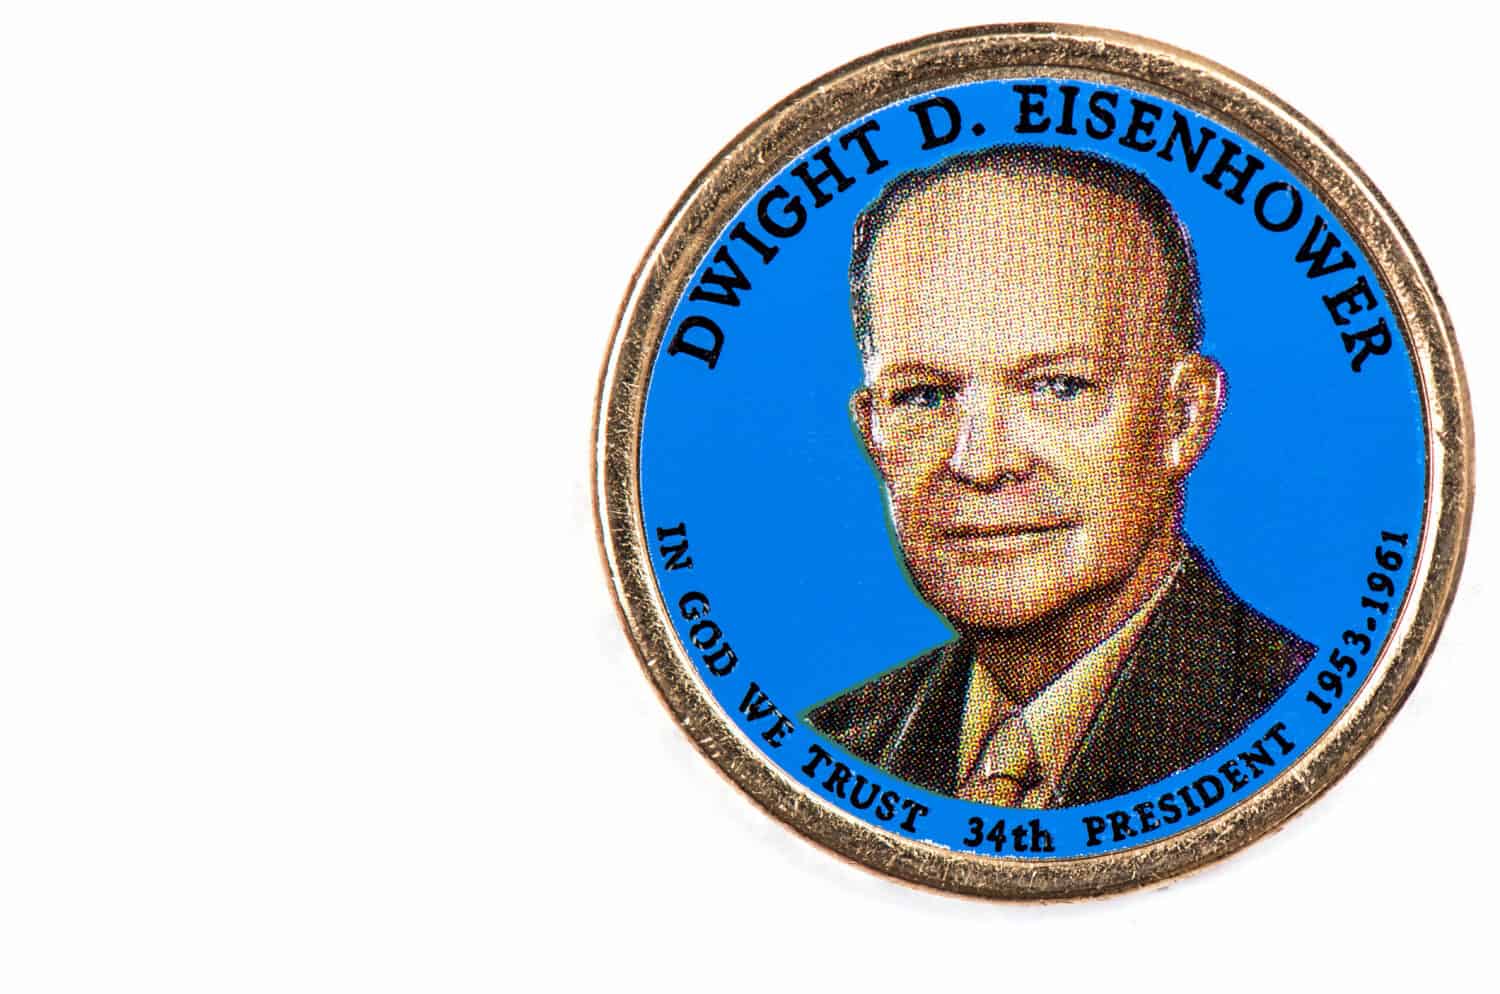 Dwight D. Eisenhower Presidential Dollar, USA coin a portrait image of LYNDON B. JOHNSON in God We Trust 34th PRESIDENT 1953-1961 on $1 United State of Amekica, Close Up UNC Uncirculated - Collection